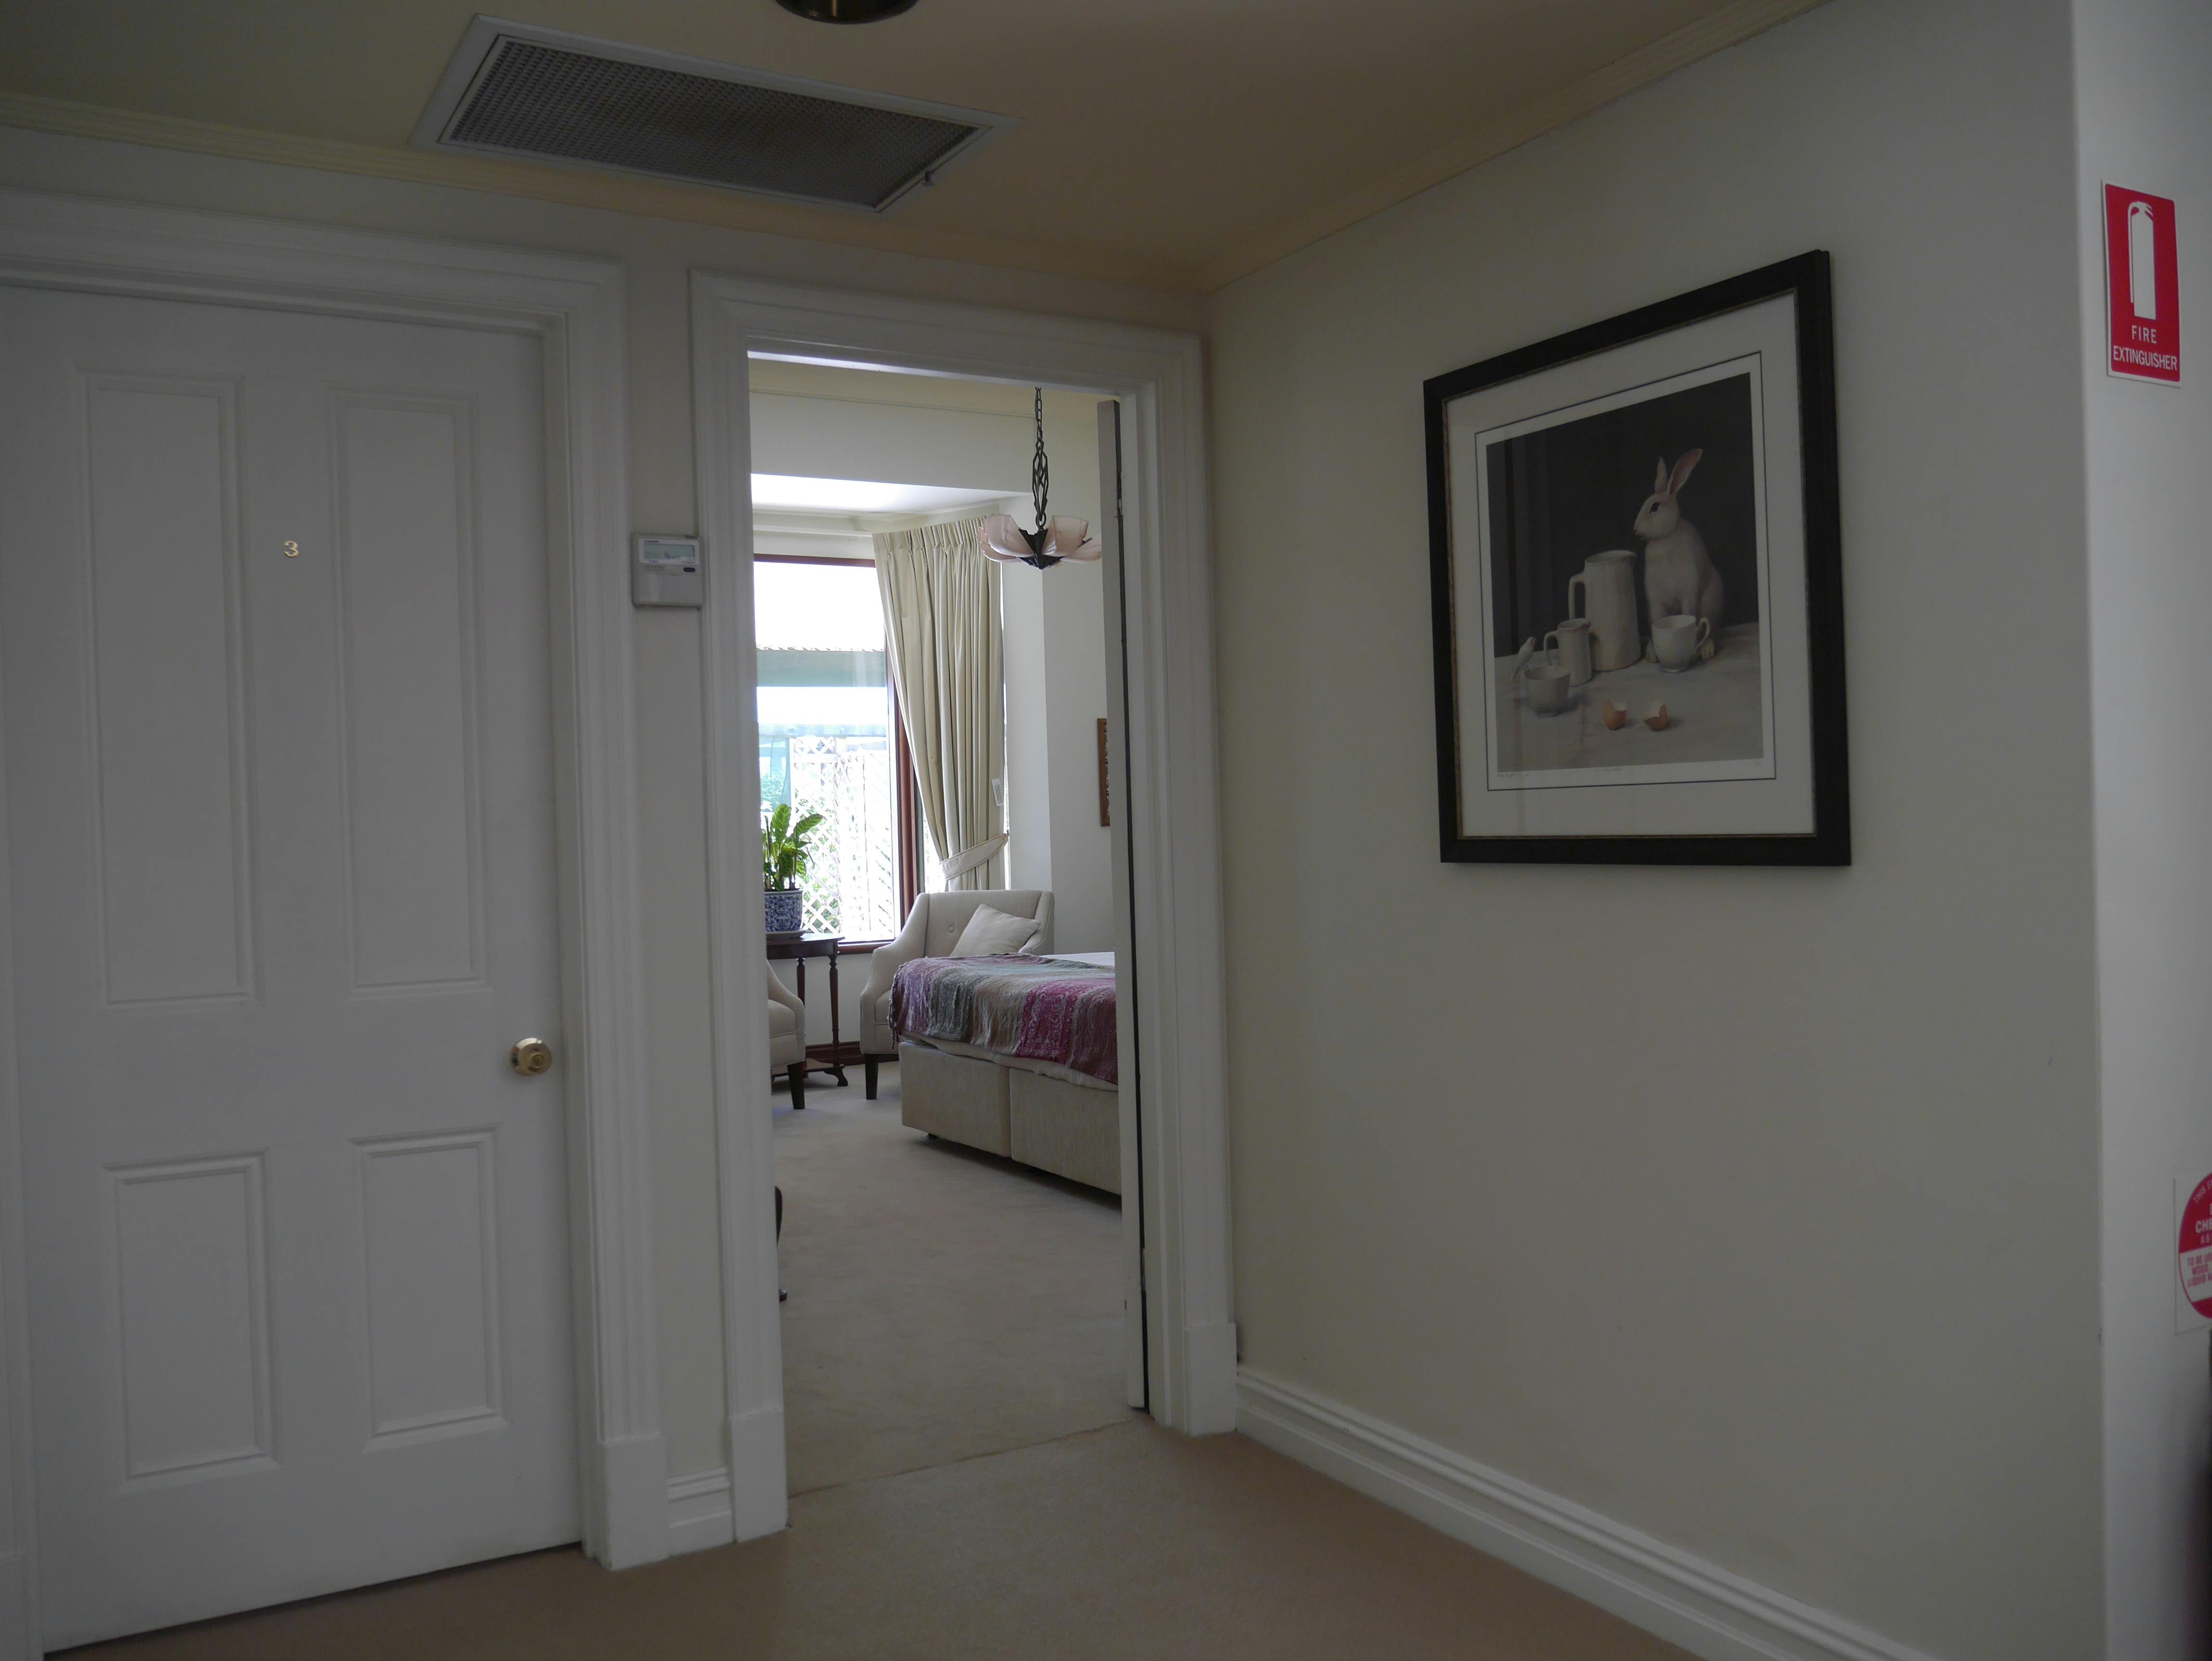 Entrance to guest room